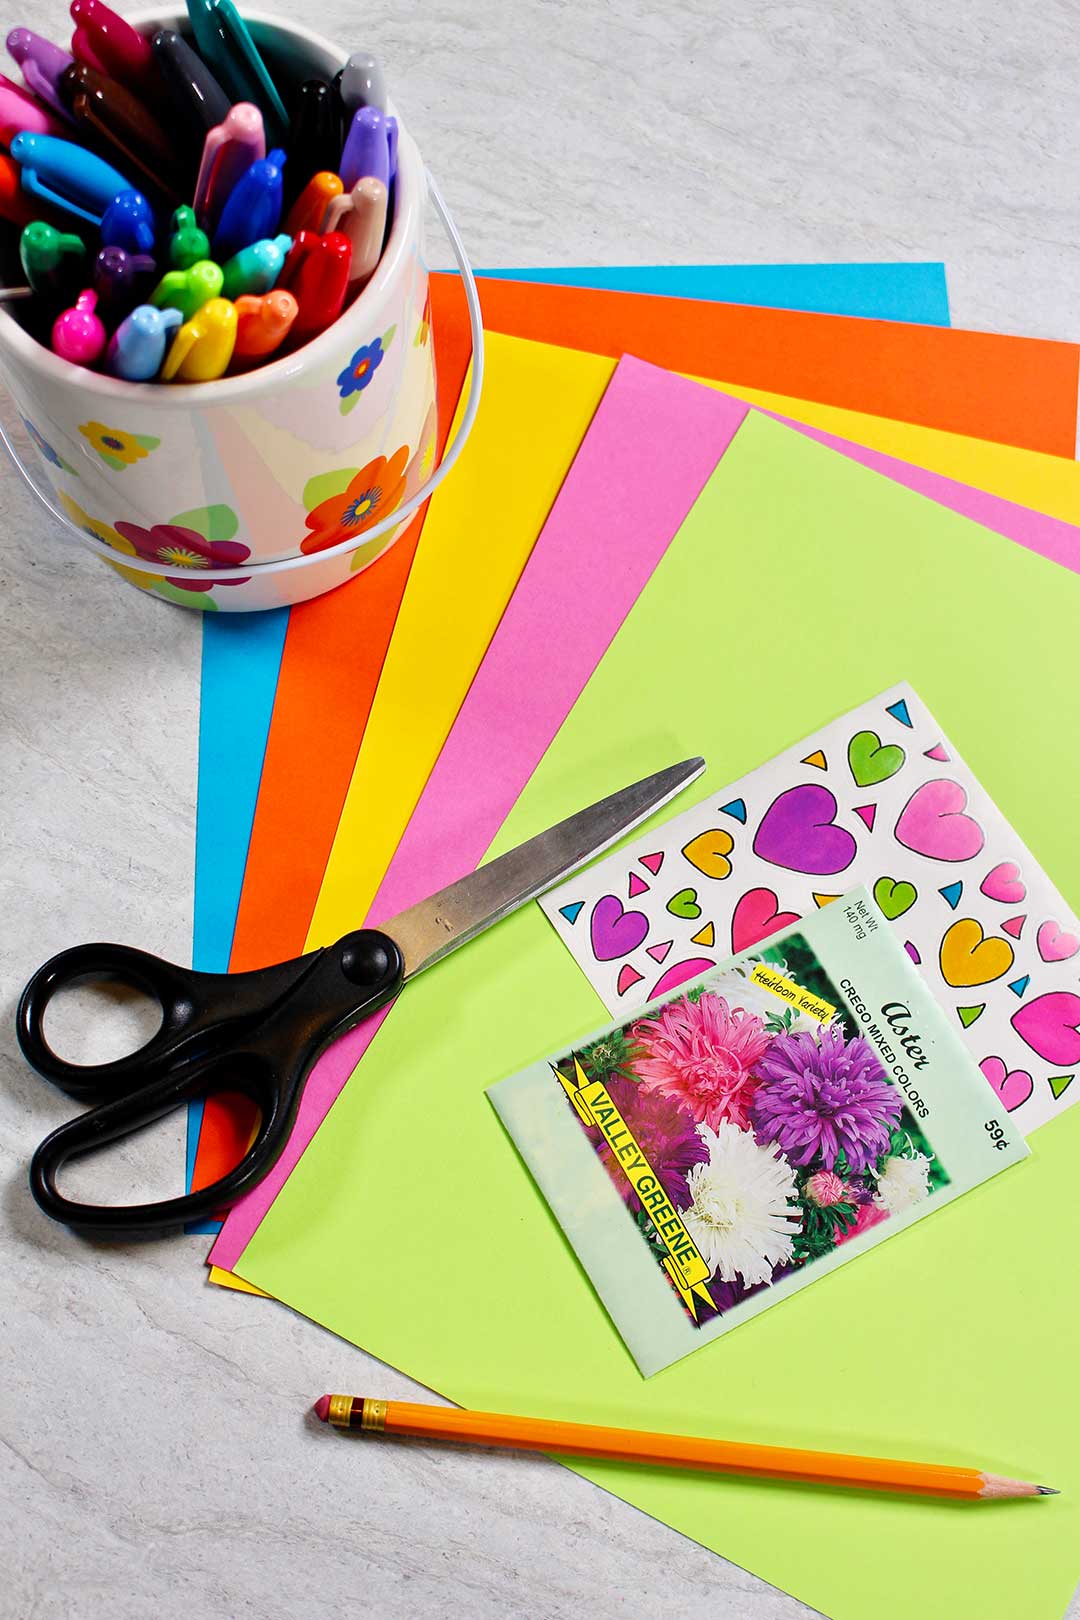 Colorful cardstock paper, flower seeds, heart stickers, a pair of scissors, colorful markers, and a pencil.